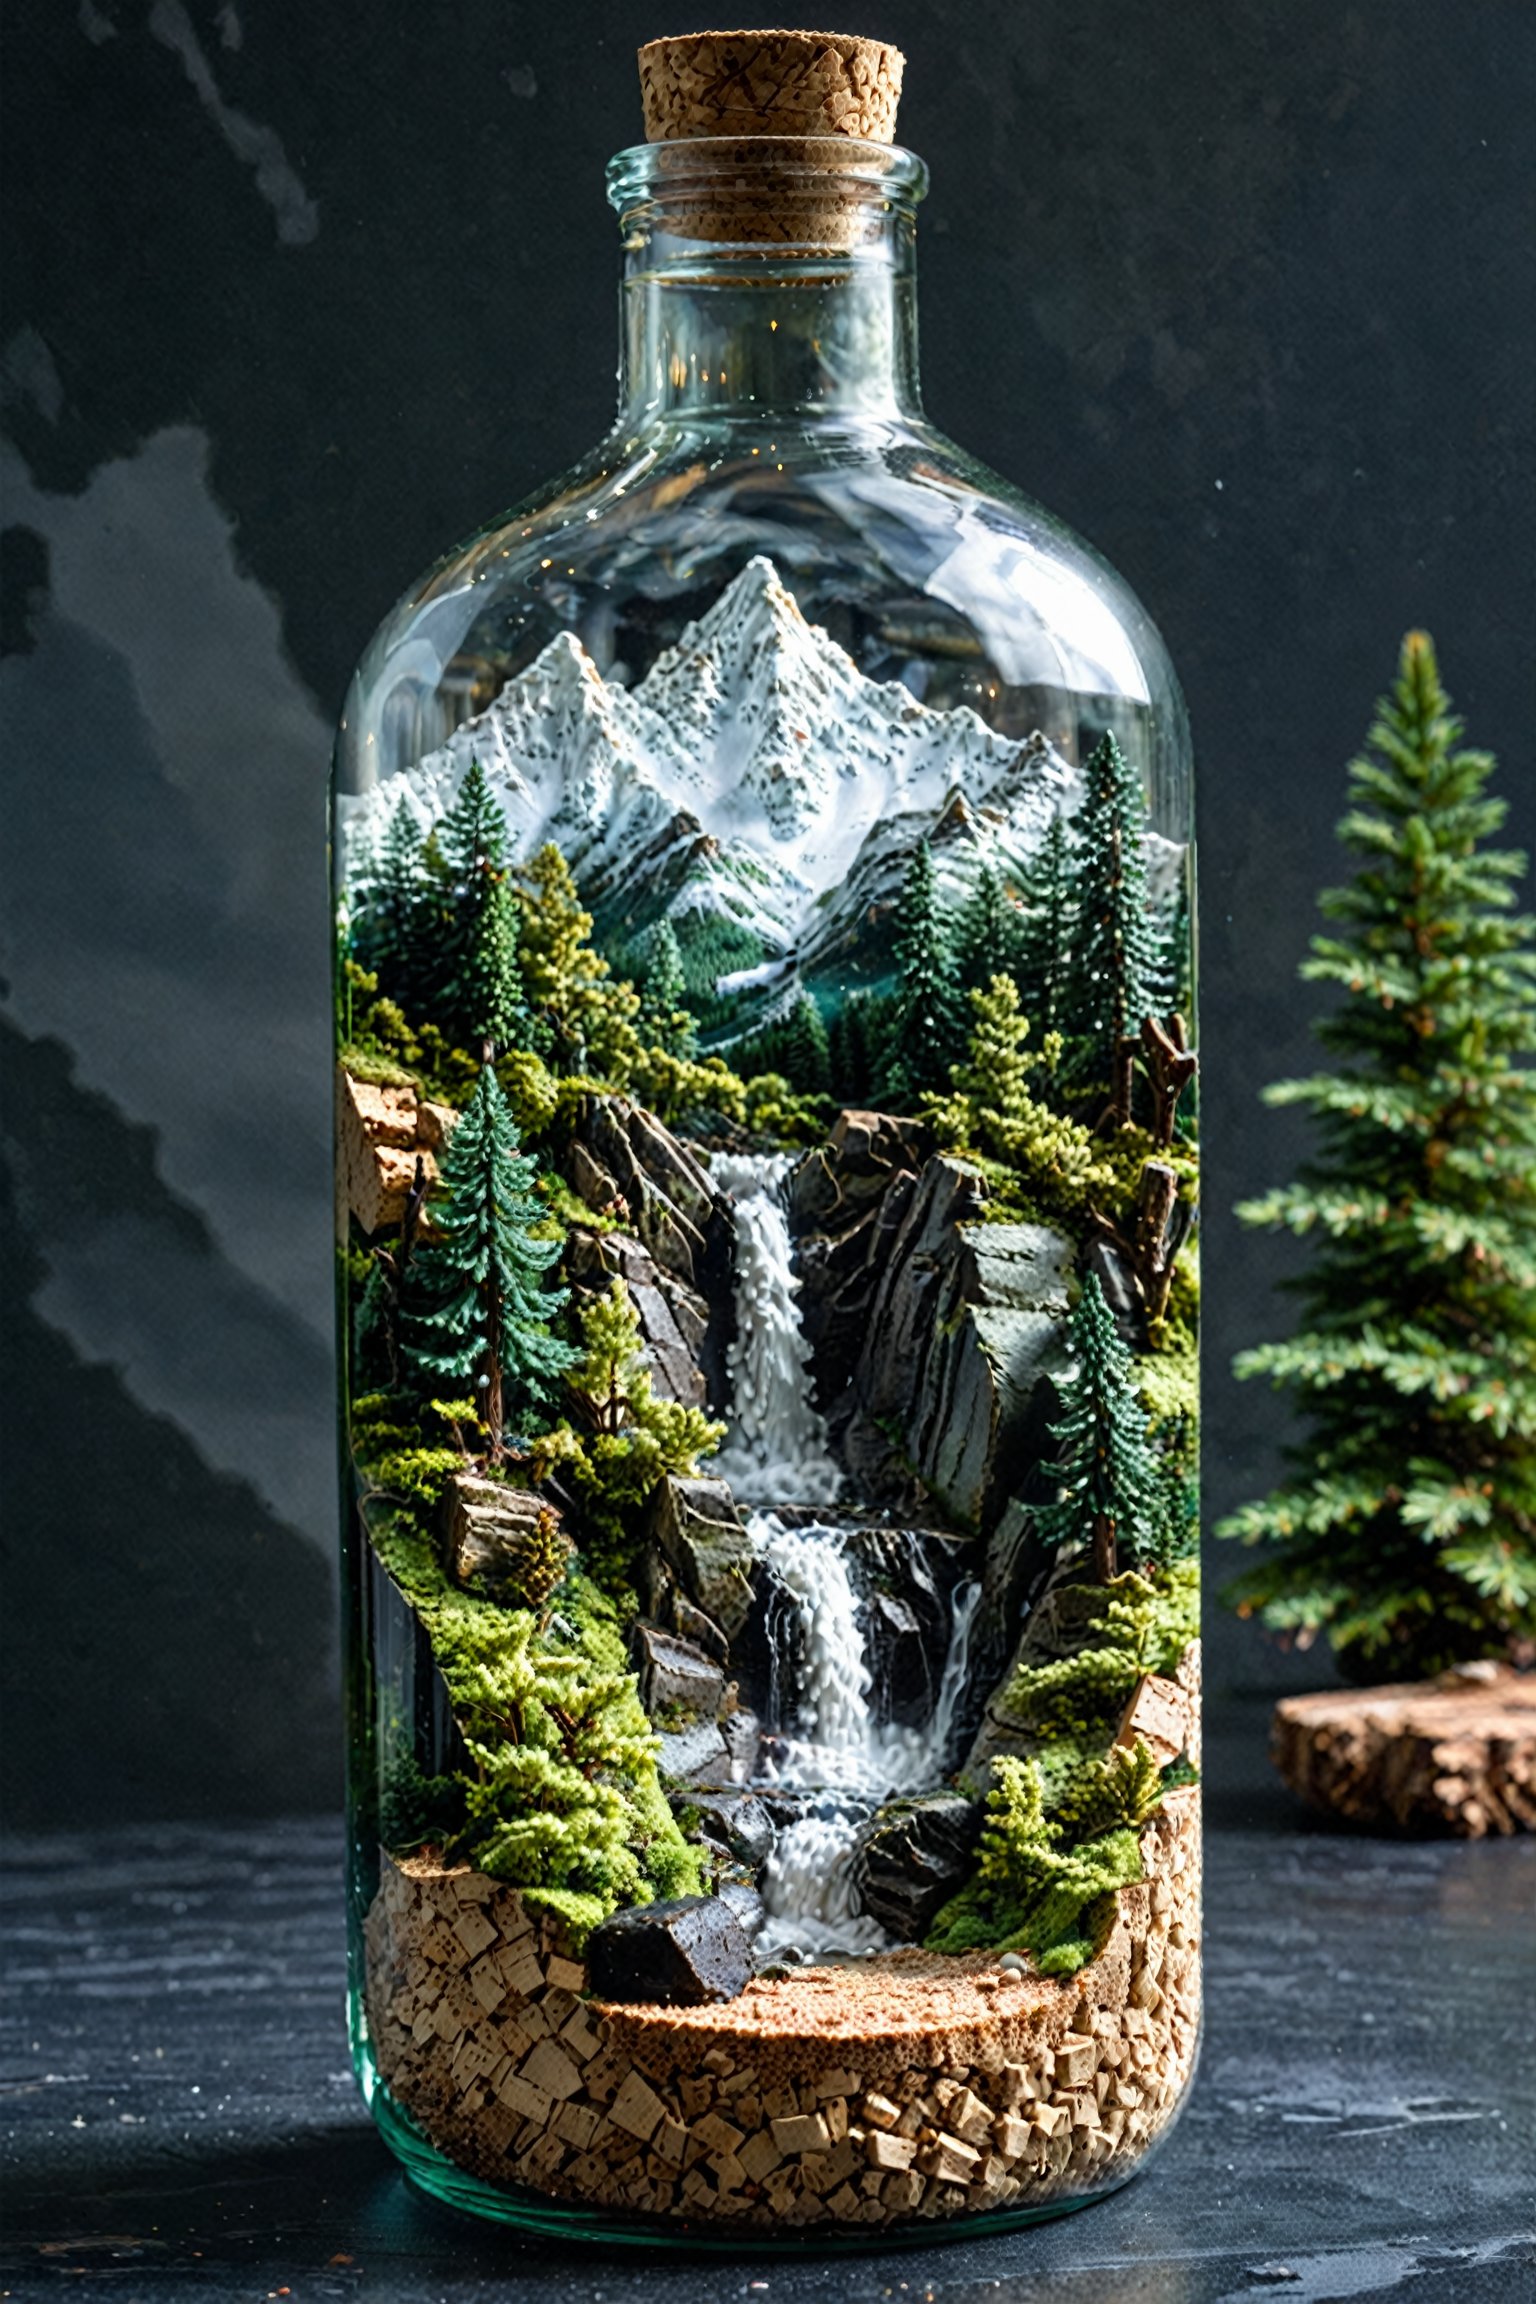 A glass bottle with a cork lid. Inside the bottle, there's a miniature landscape. It features snow-capped mountains in the background, a dense forest of evergreen trees in the middle, and a cascading waterfall at the bottom. The bottle is placed on a dark surface with a subtle reflection of the bottle and its contents.